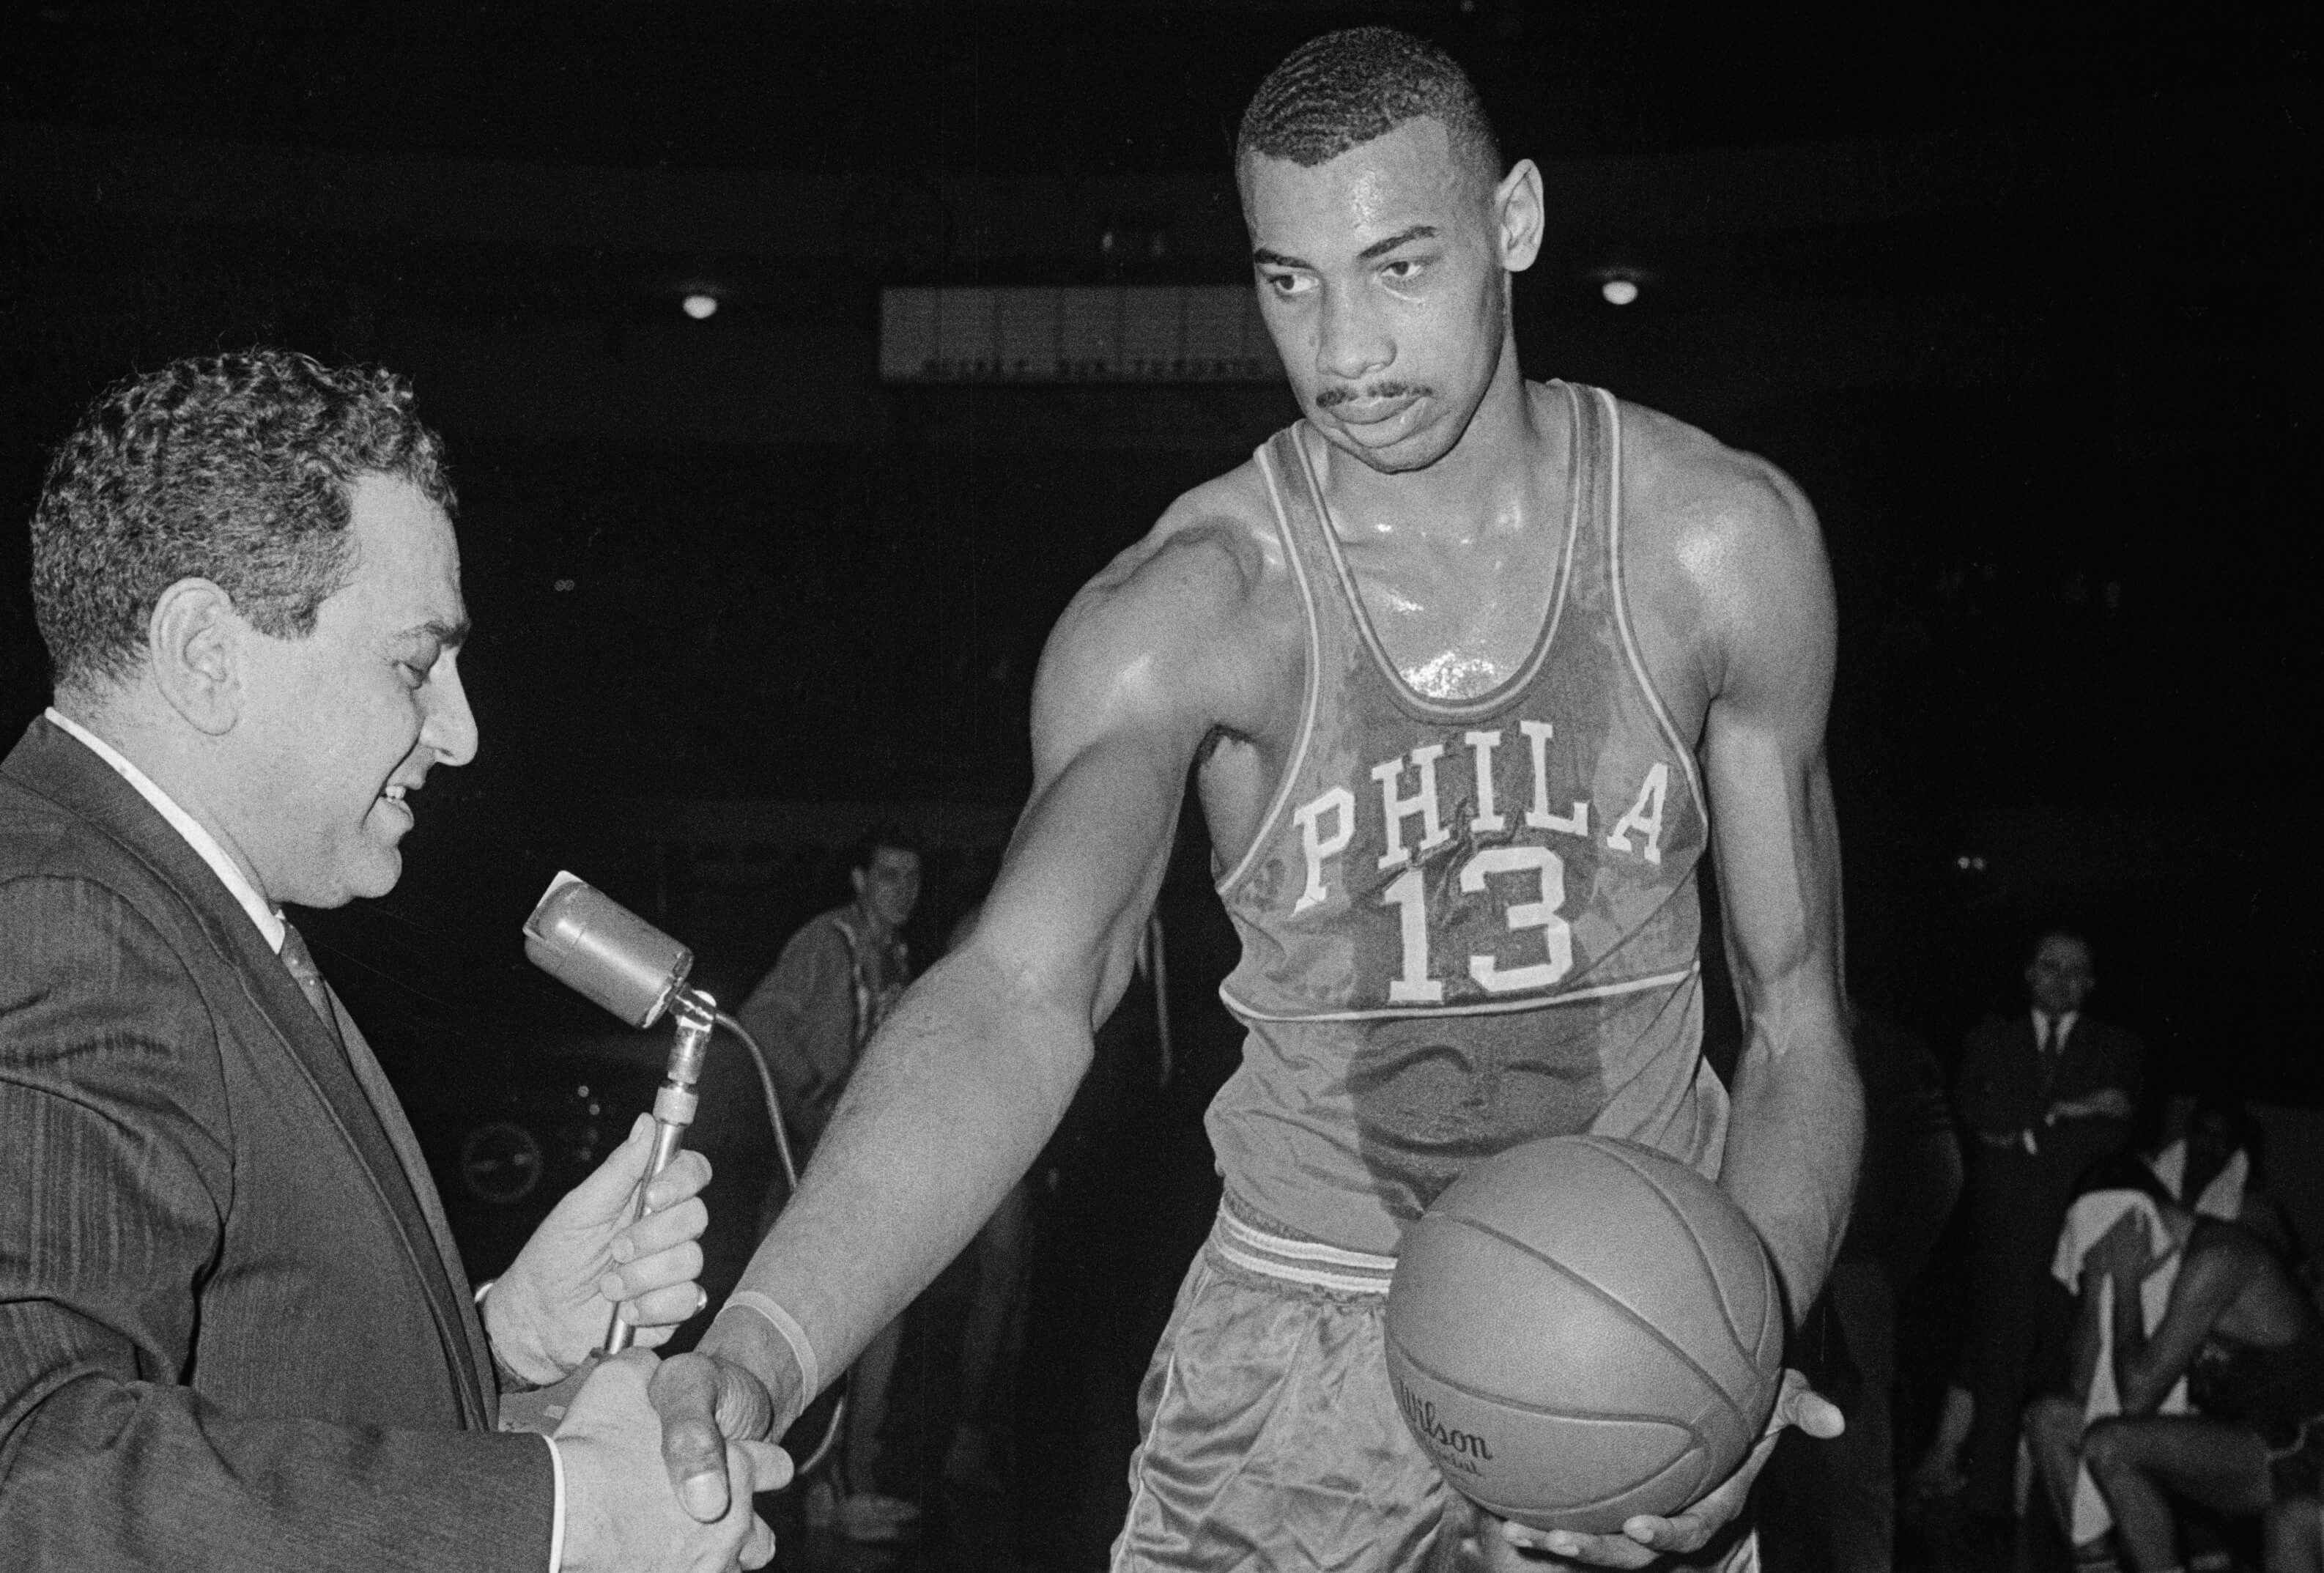 Wilt Chamberlain, of the Philadelphia Warriors, accepts the congratulations of Detroit Pistons General Manager Nick Kerbawy.